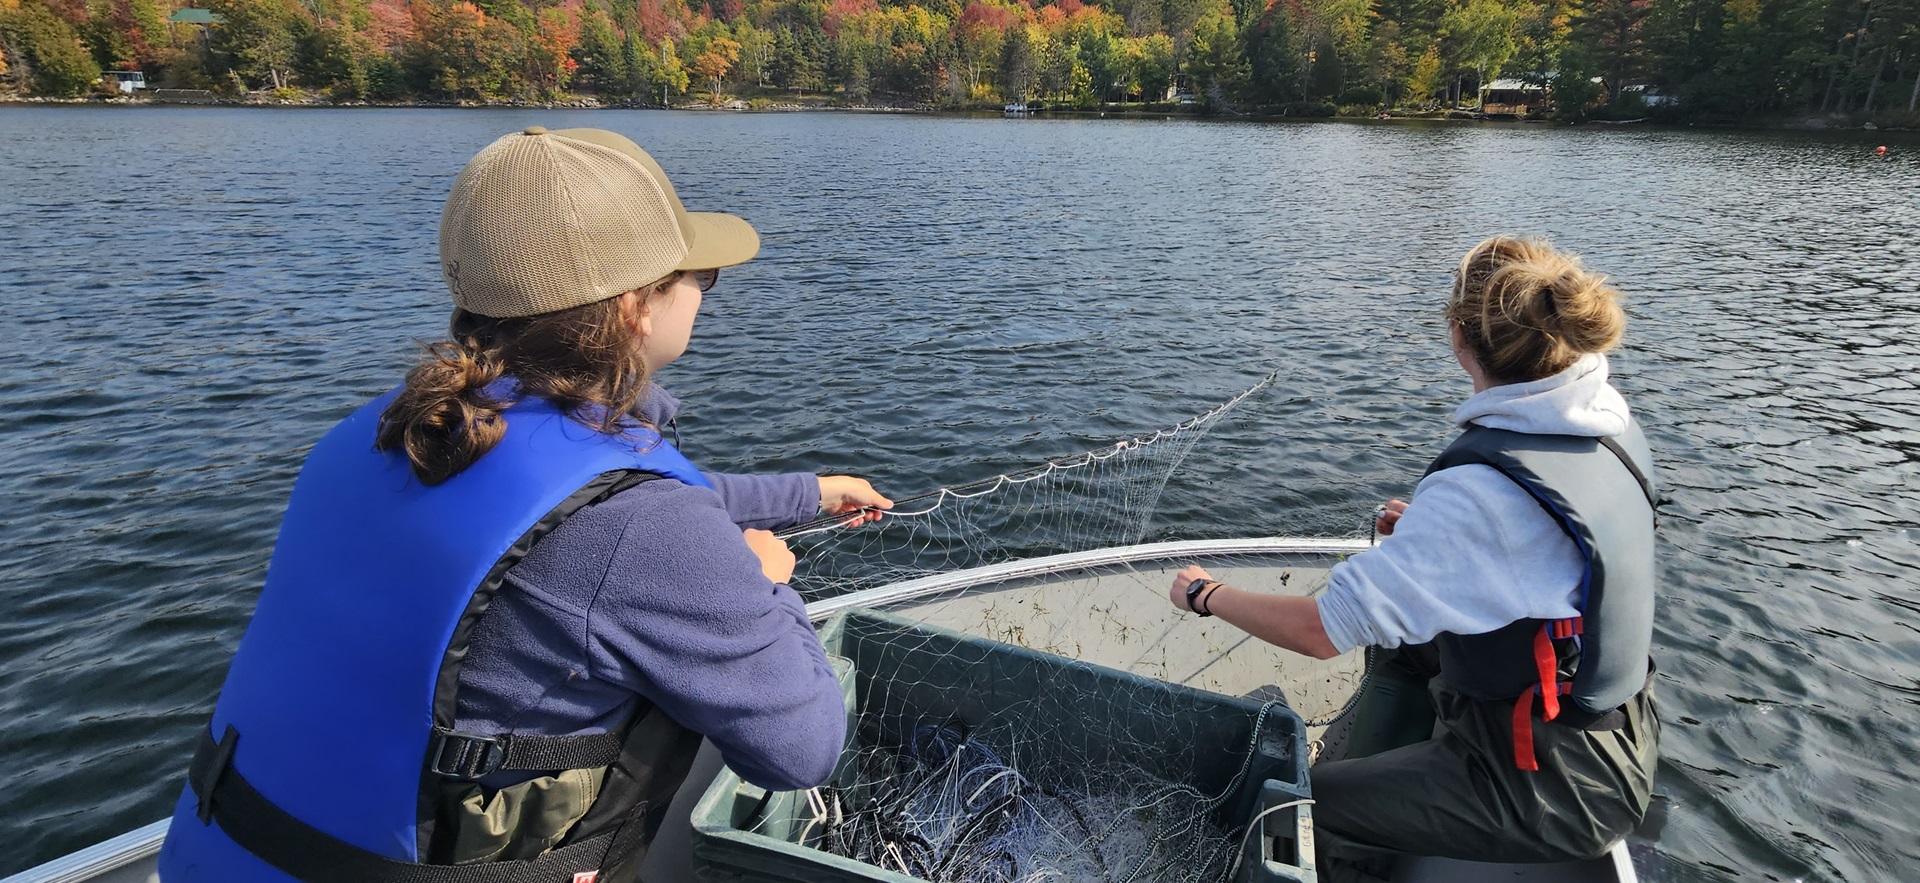 Fish and Wildlife students casting a net on a boat in the lake